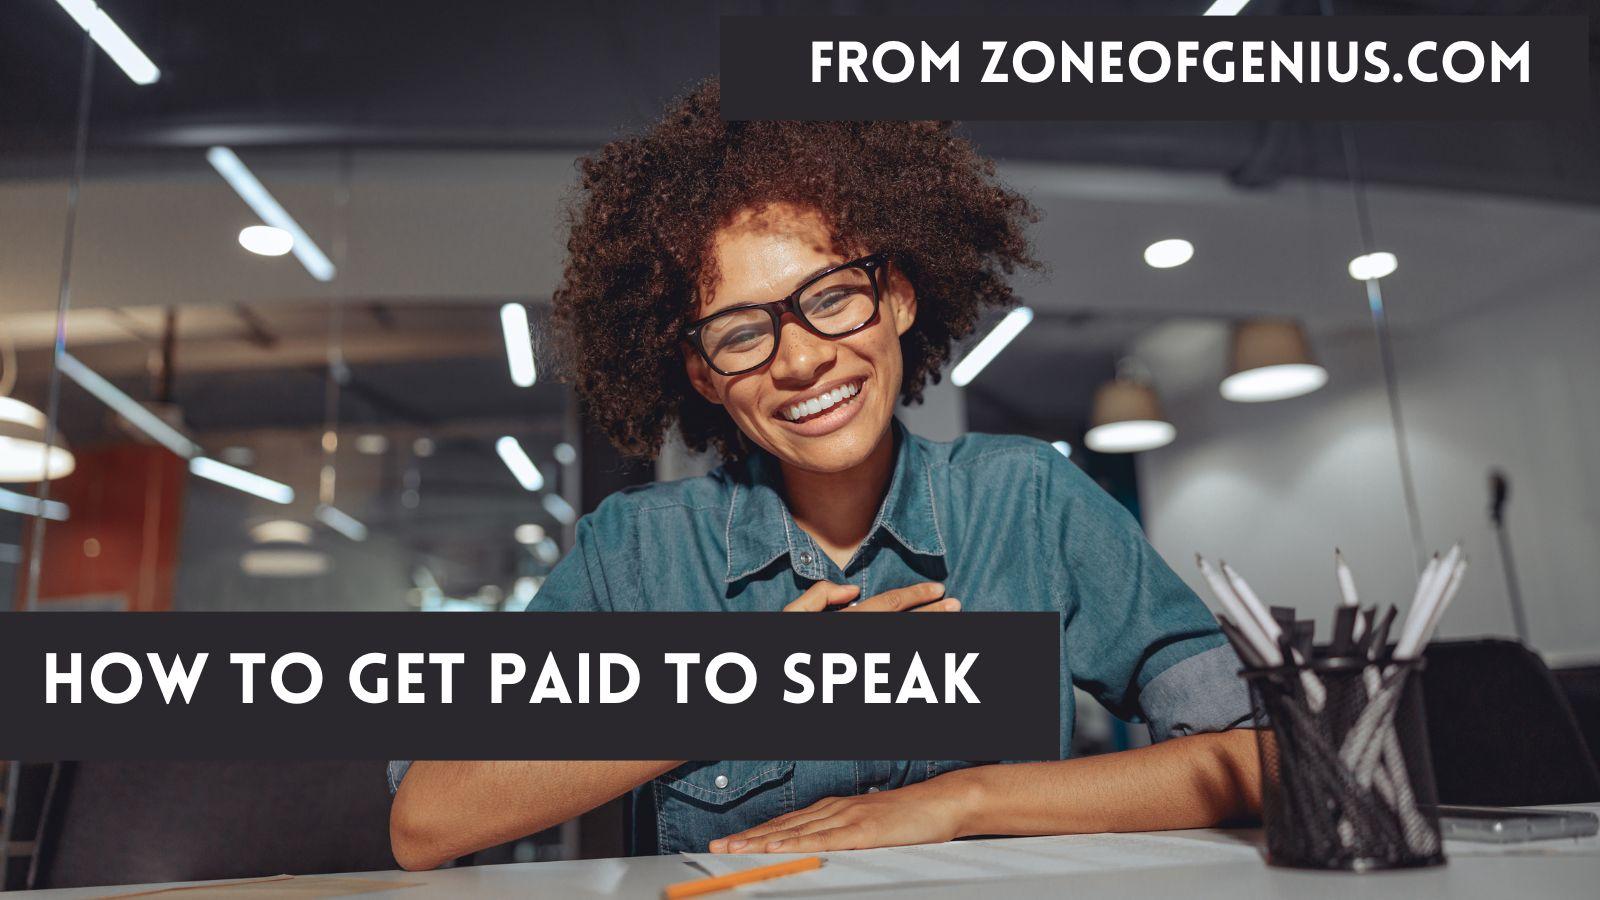 How To Get Paid to speak